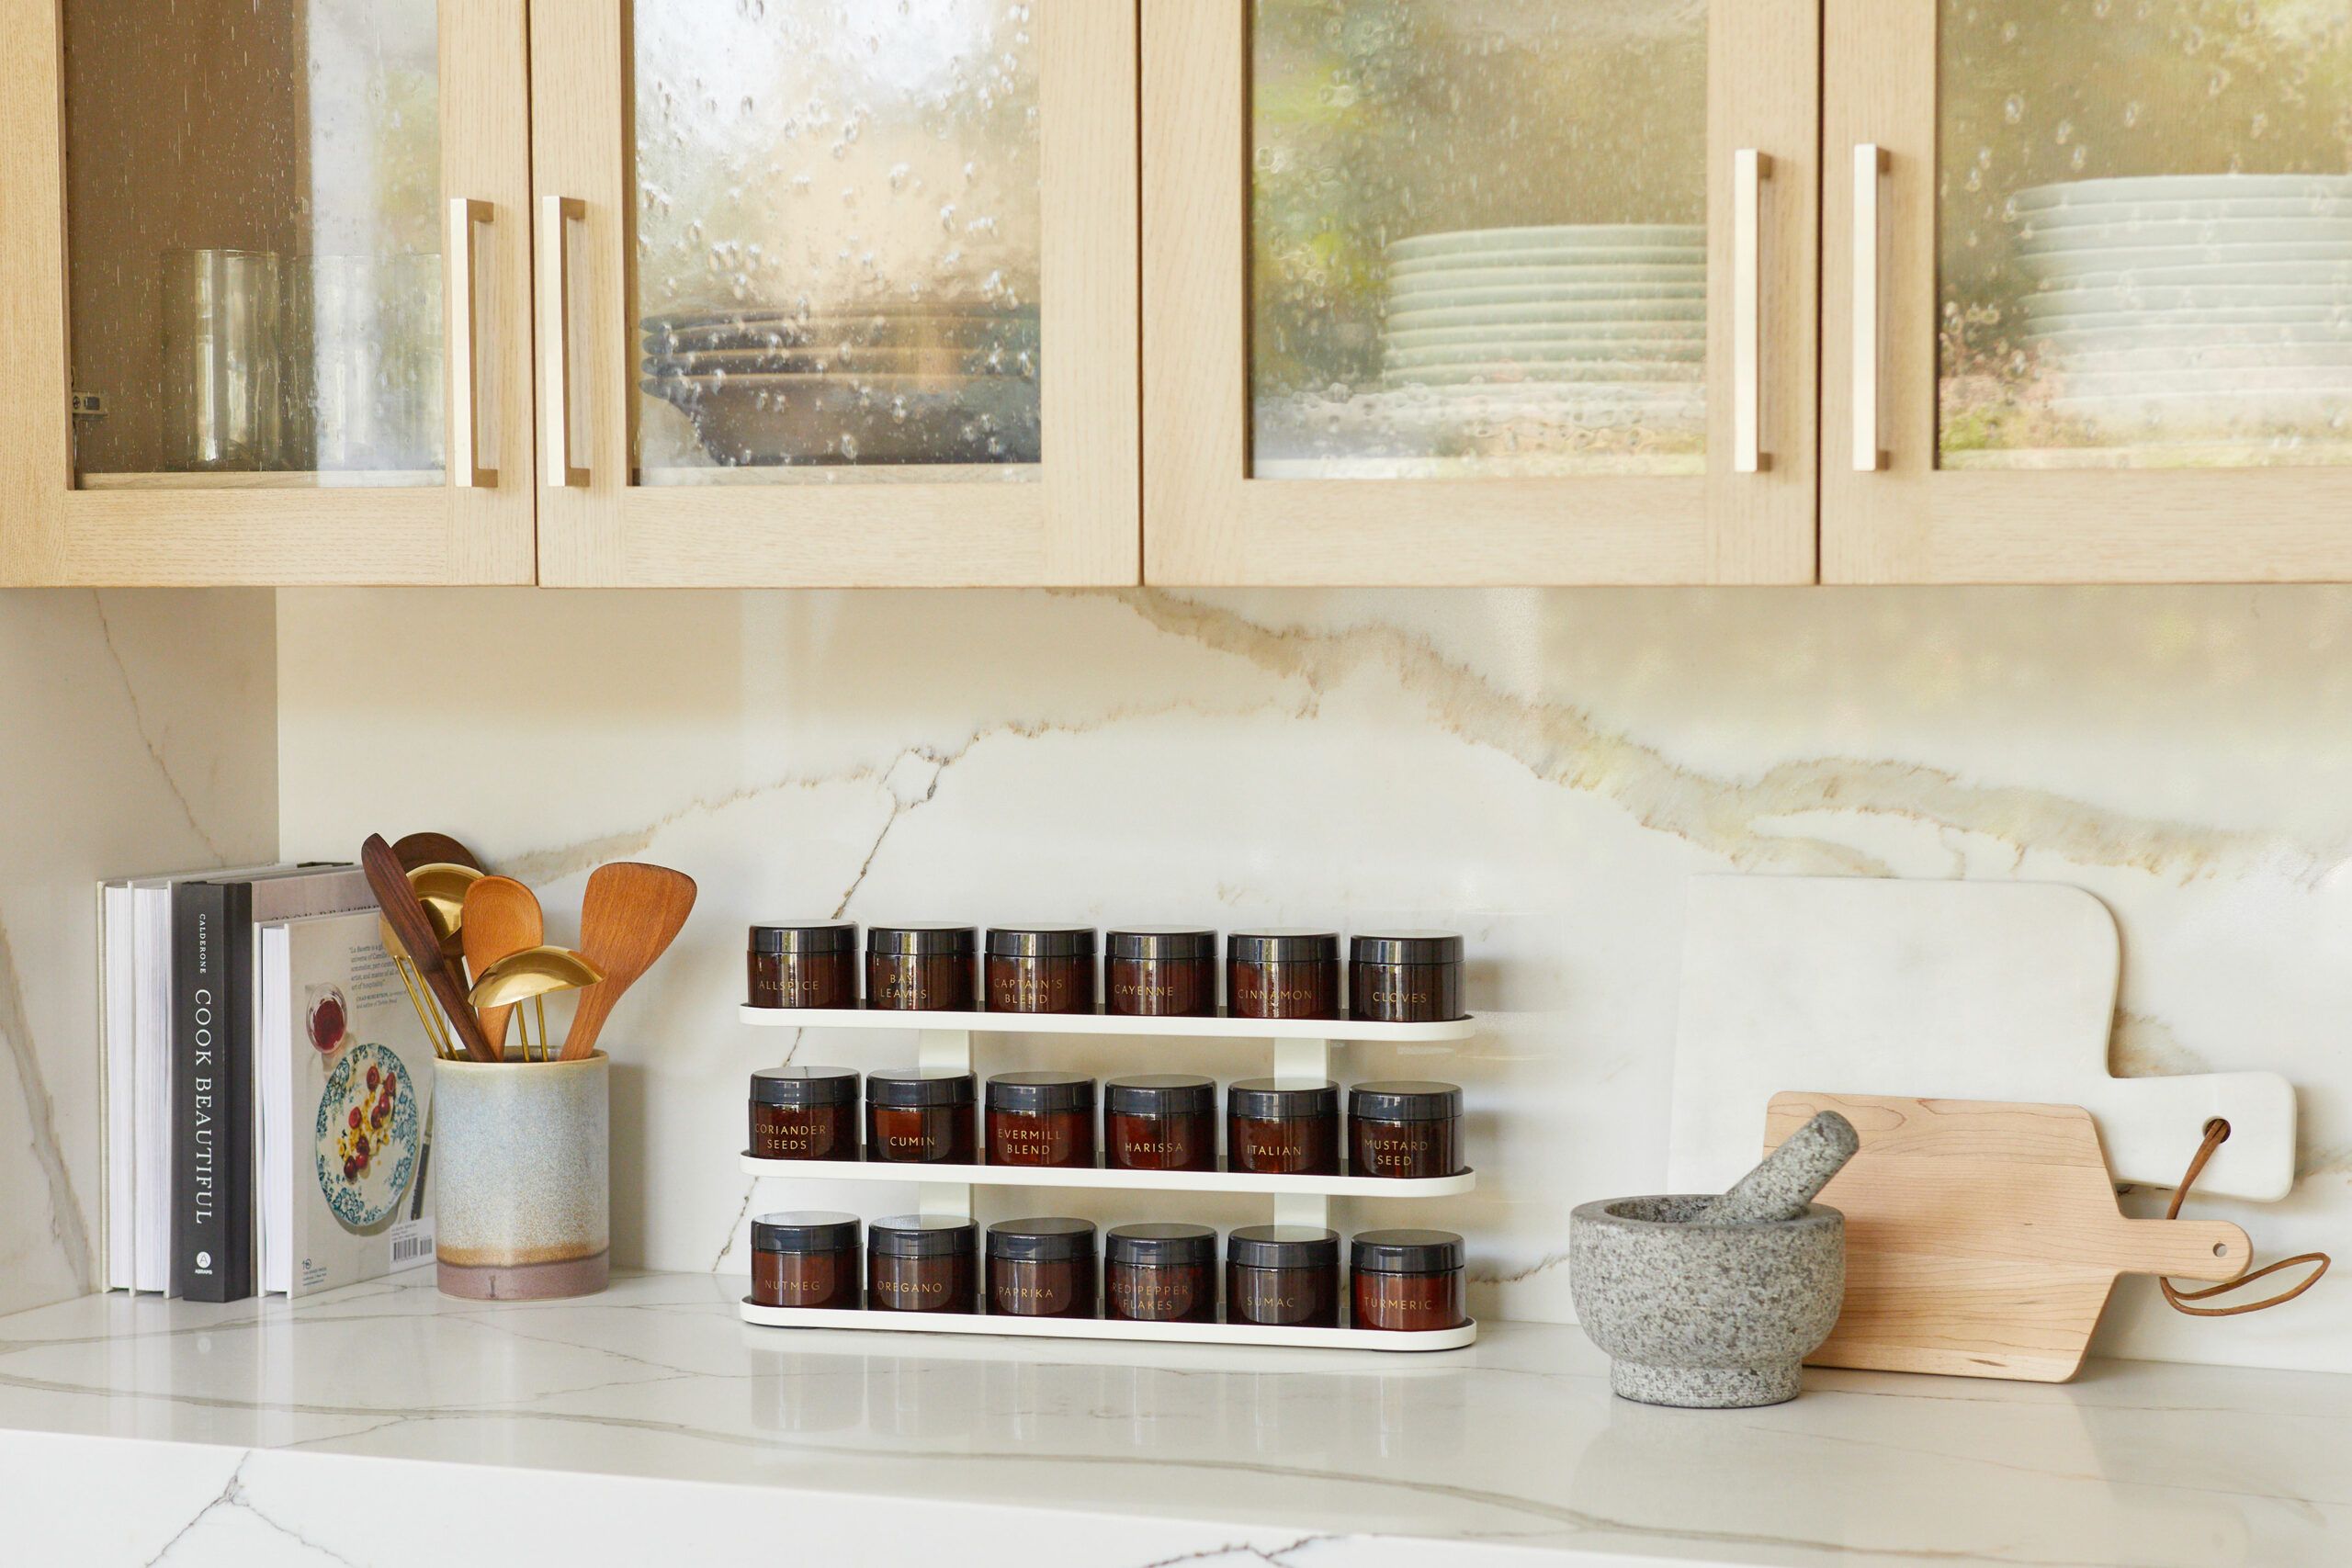 12 Cabinet Spice Rack Ideas That Give You Precious Countertop